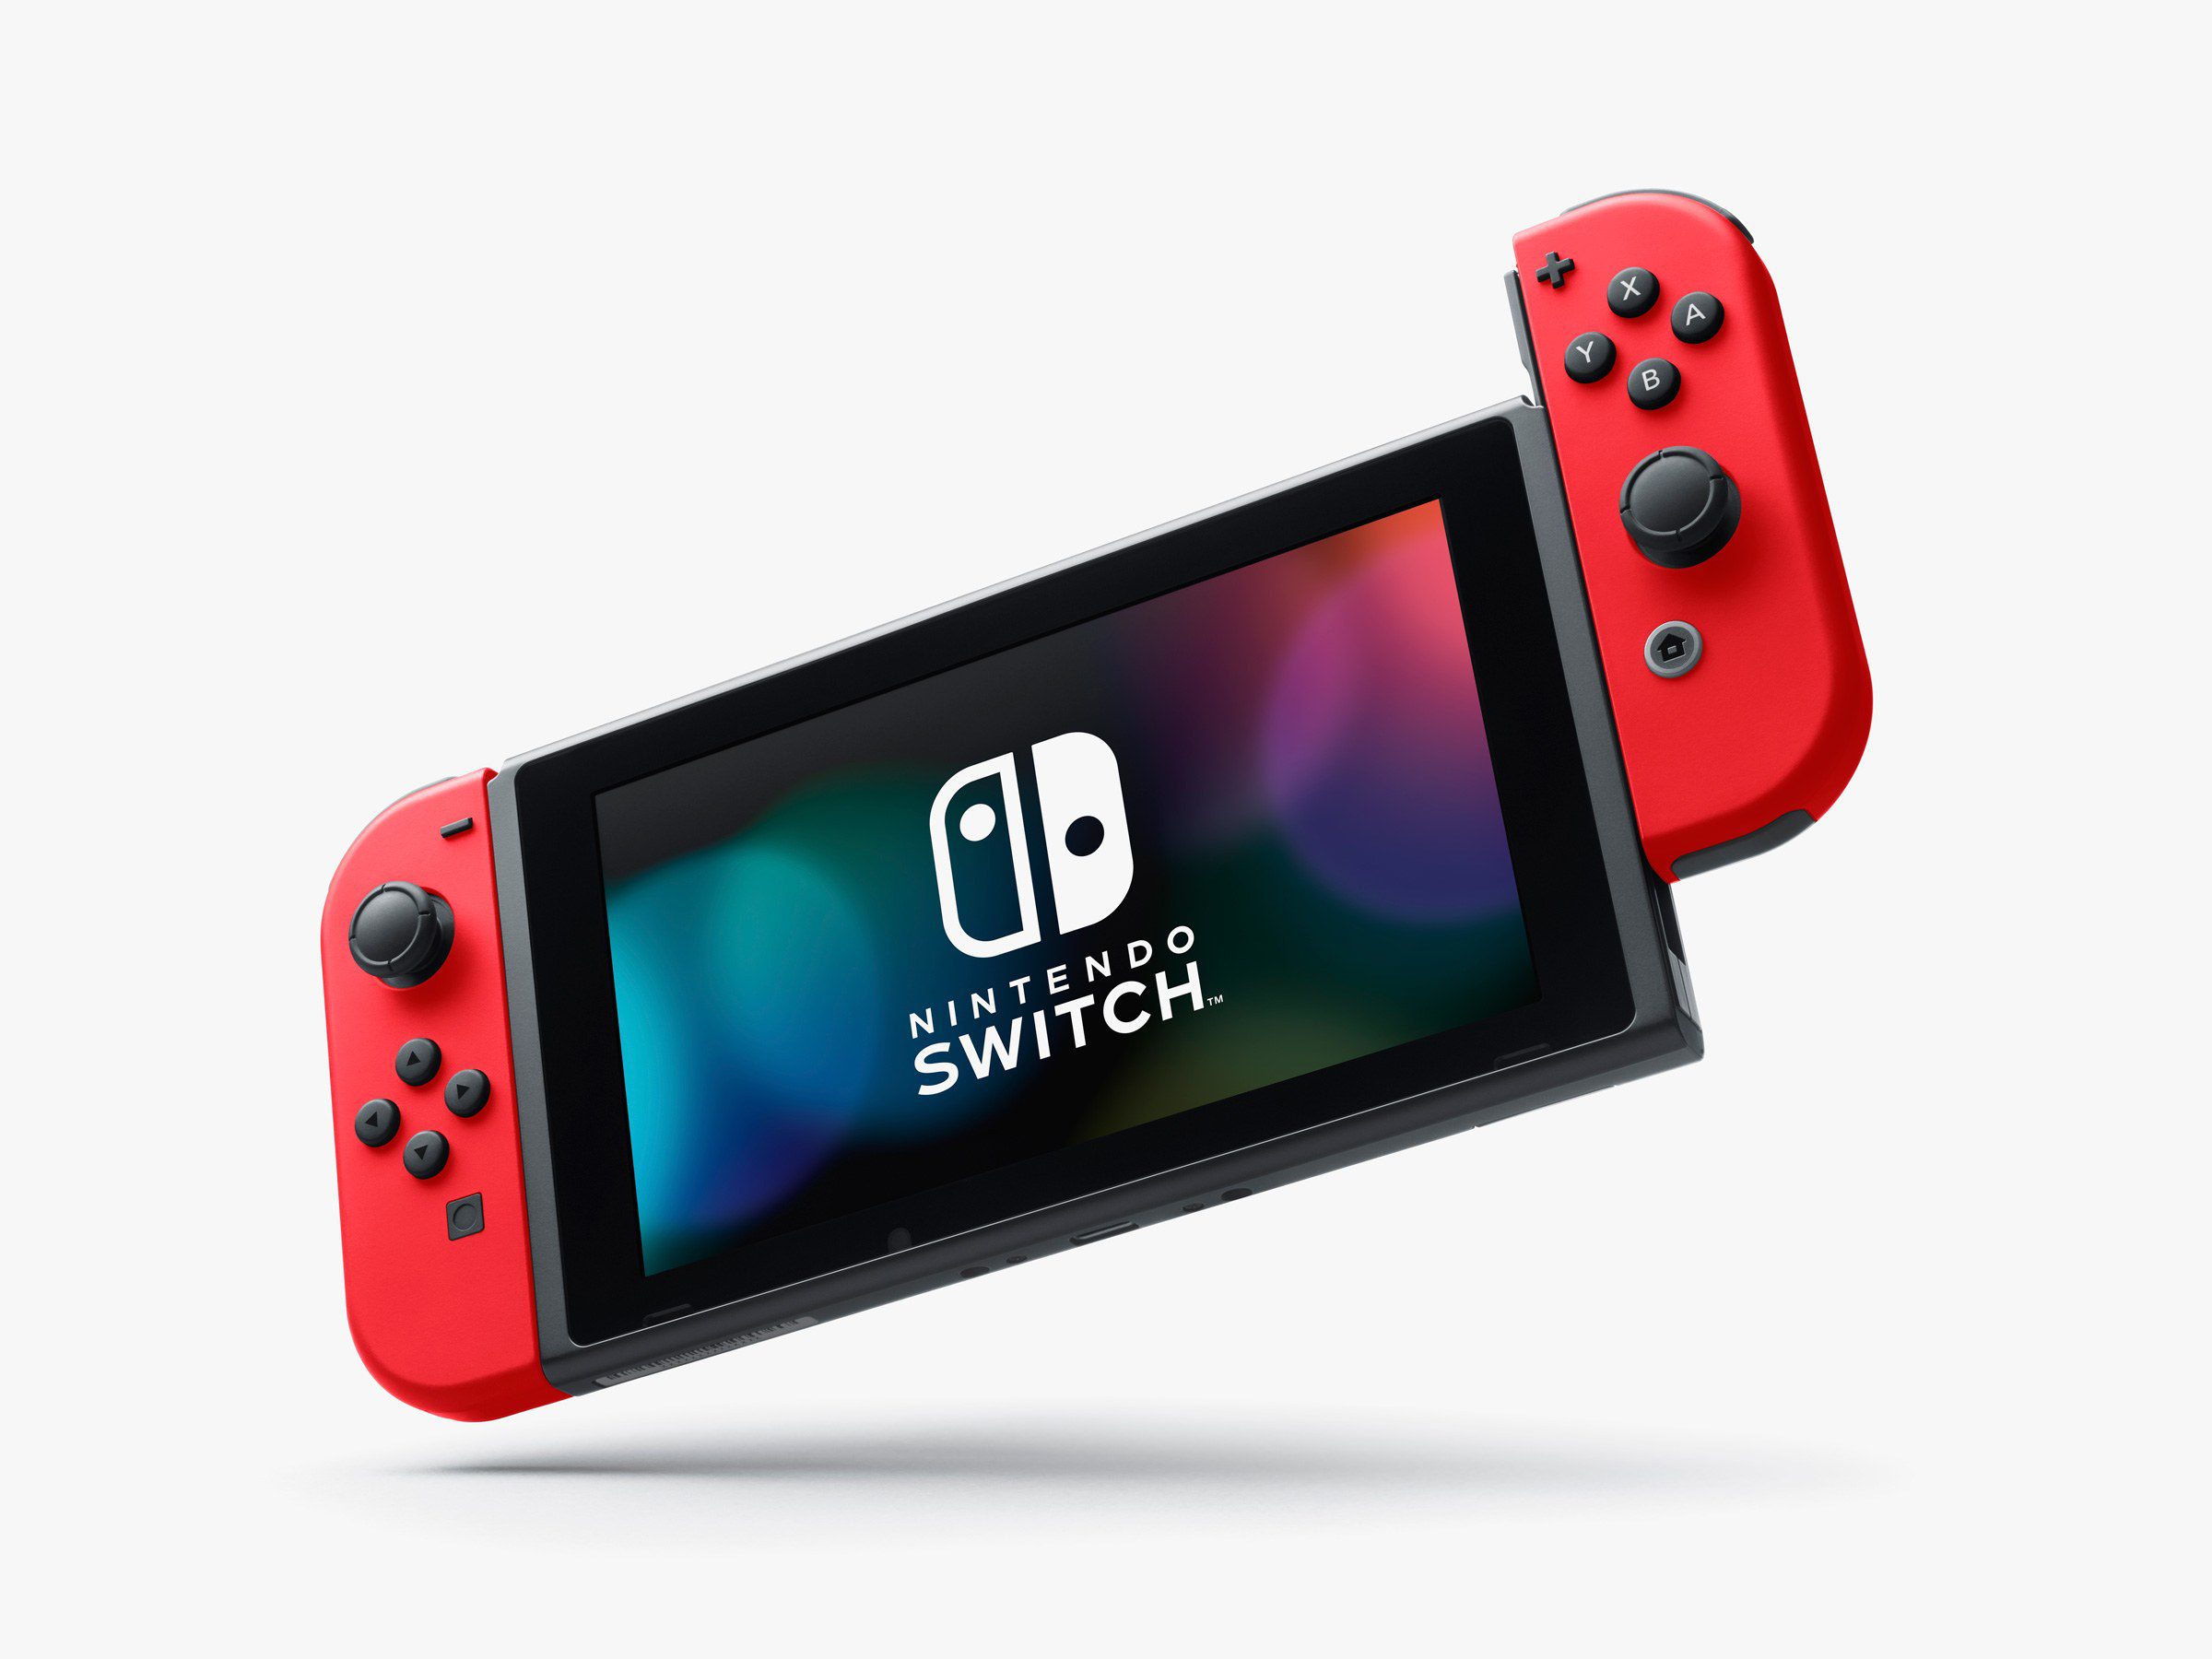 Nintendo Switch New Cheaper And Enhanced Models Coming Soon